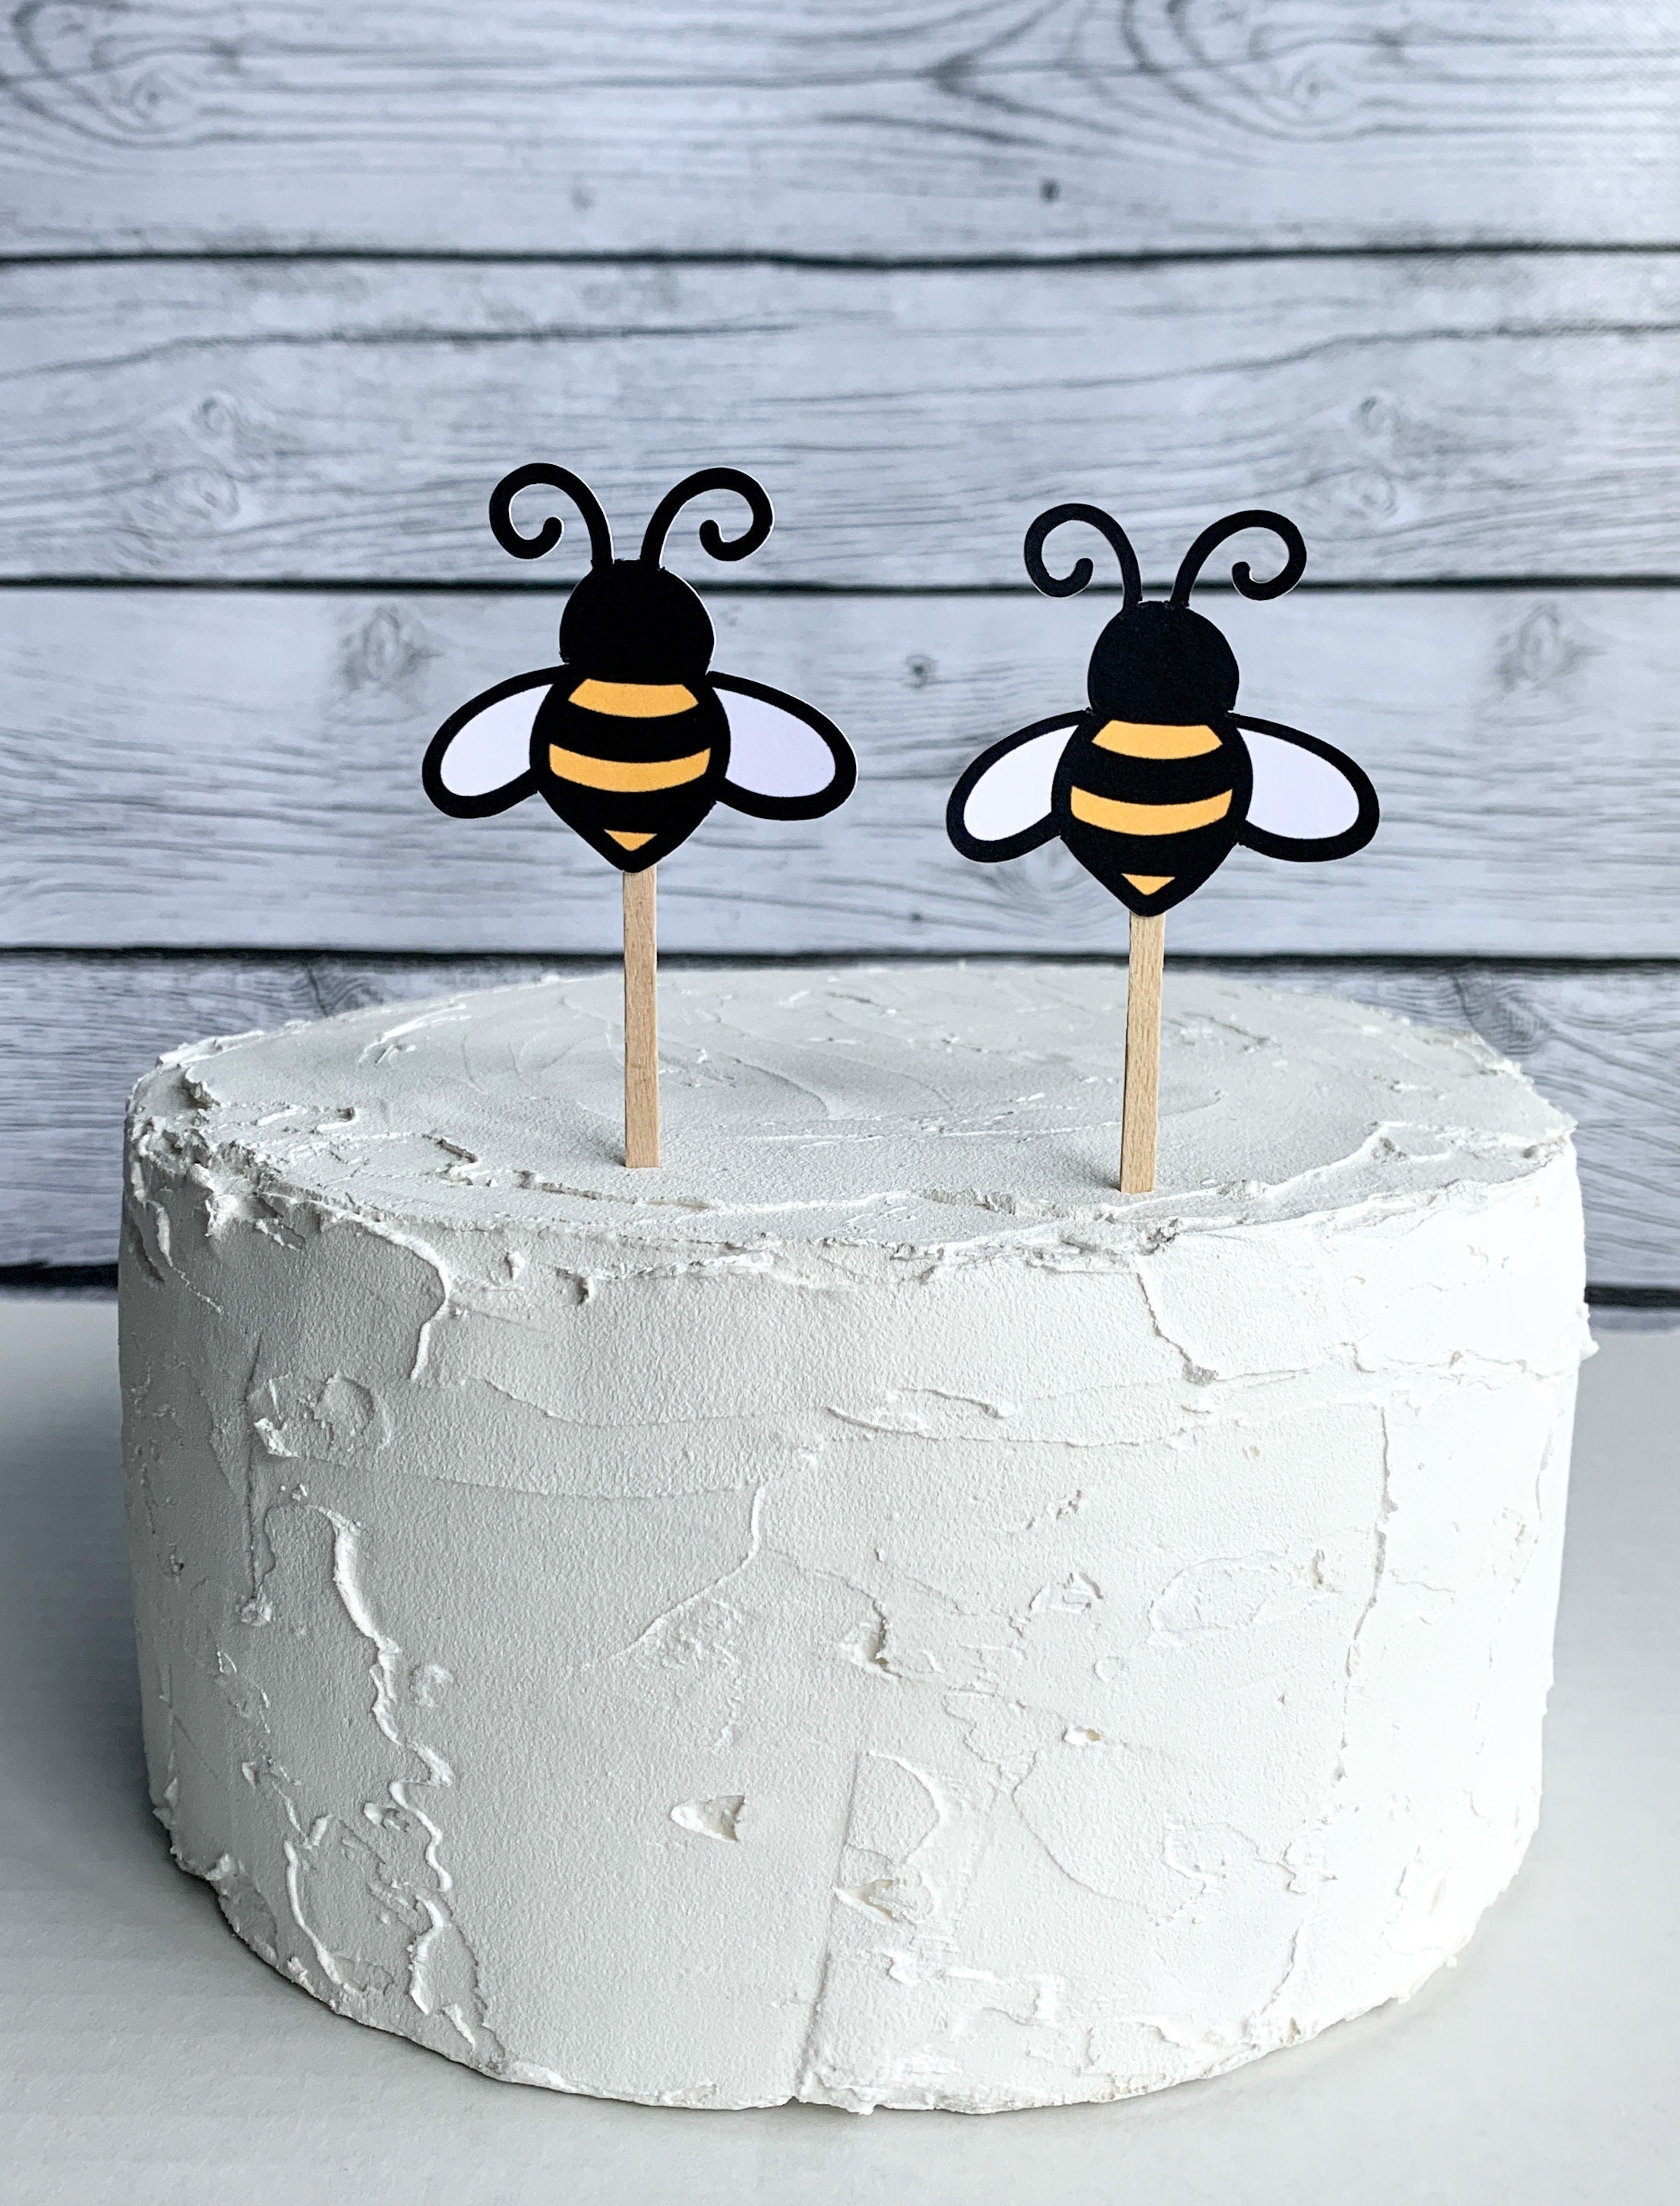 15 HONEY BEES EDIBLE Sugar Cupcake or Cake Toppers Bee Decorations for  Party Desserts, Birthdays, Spring Themed Party 